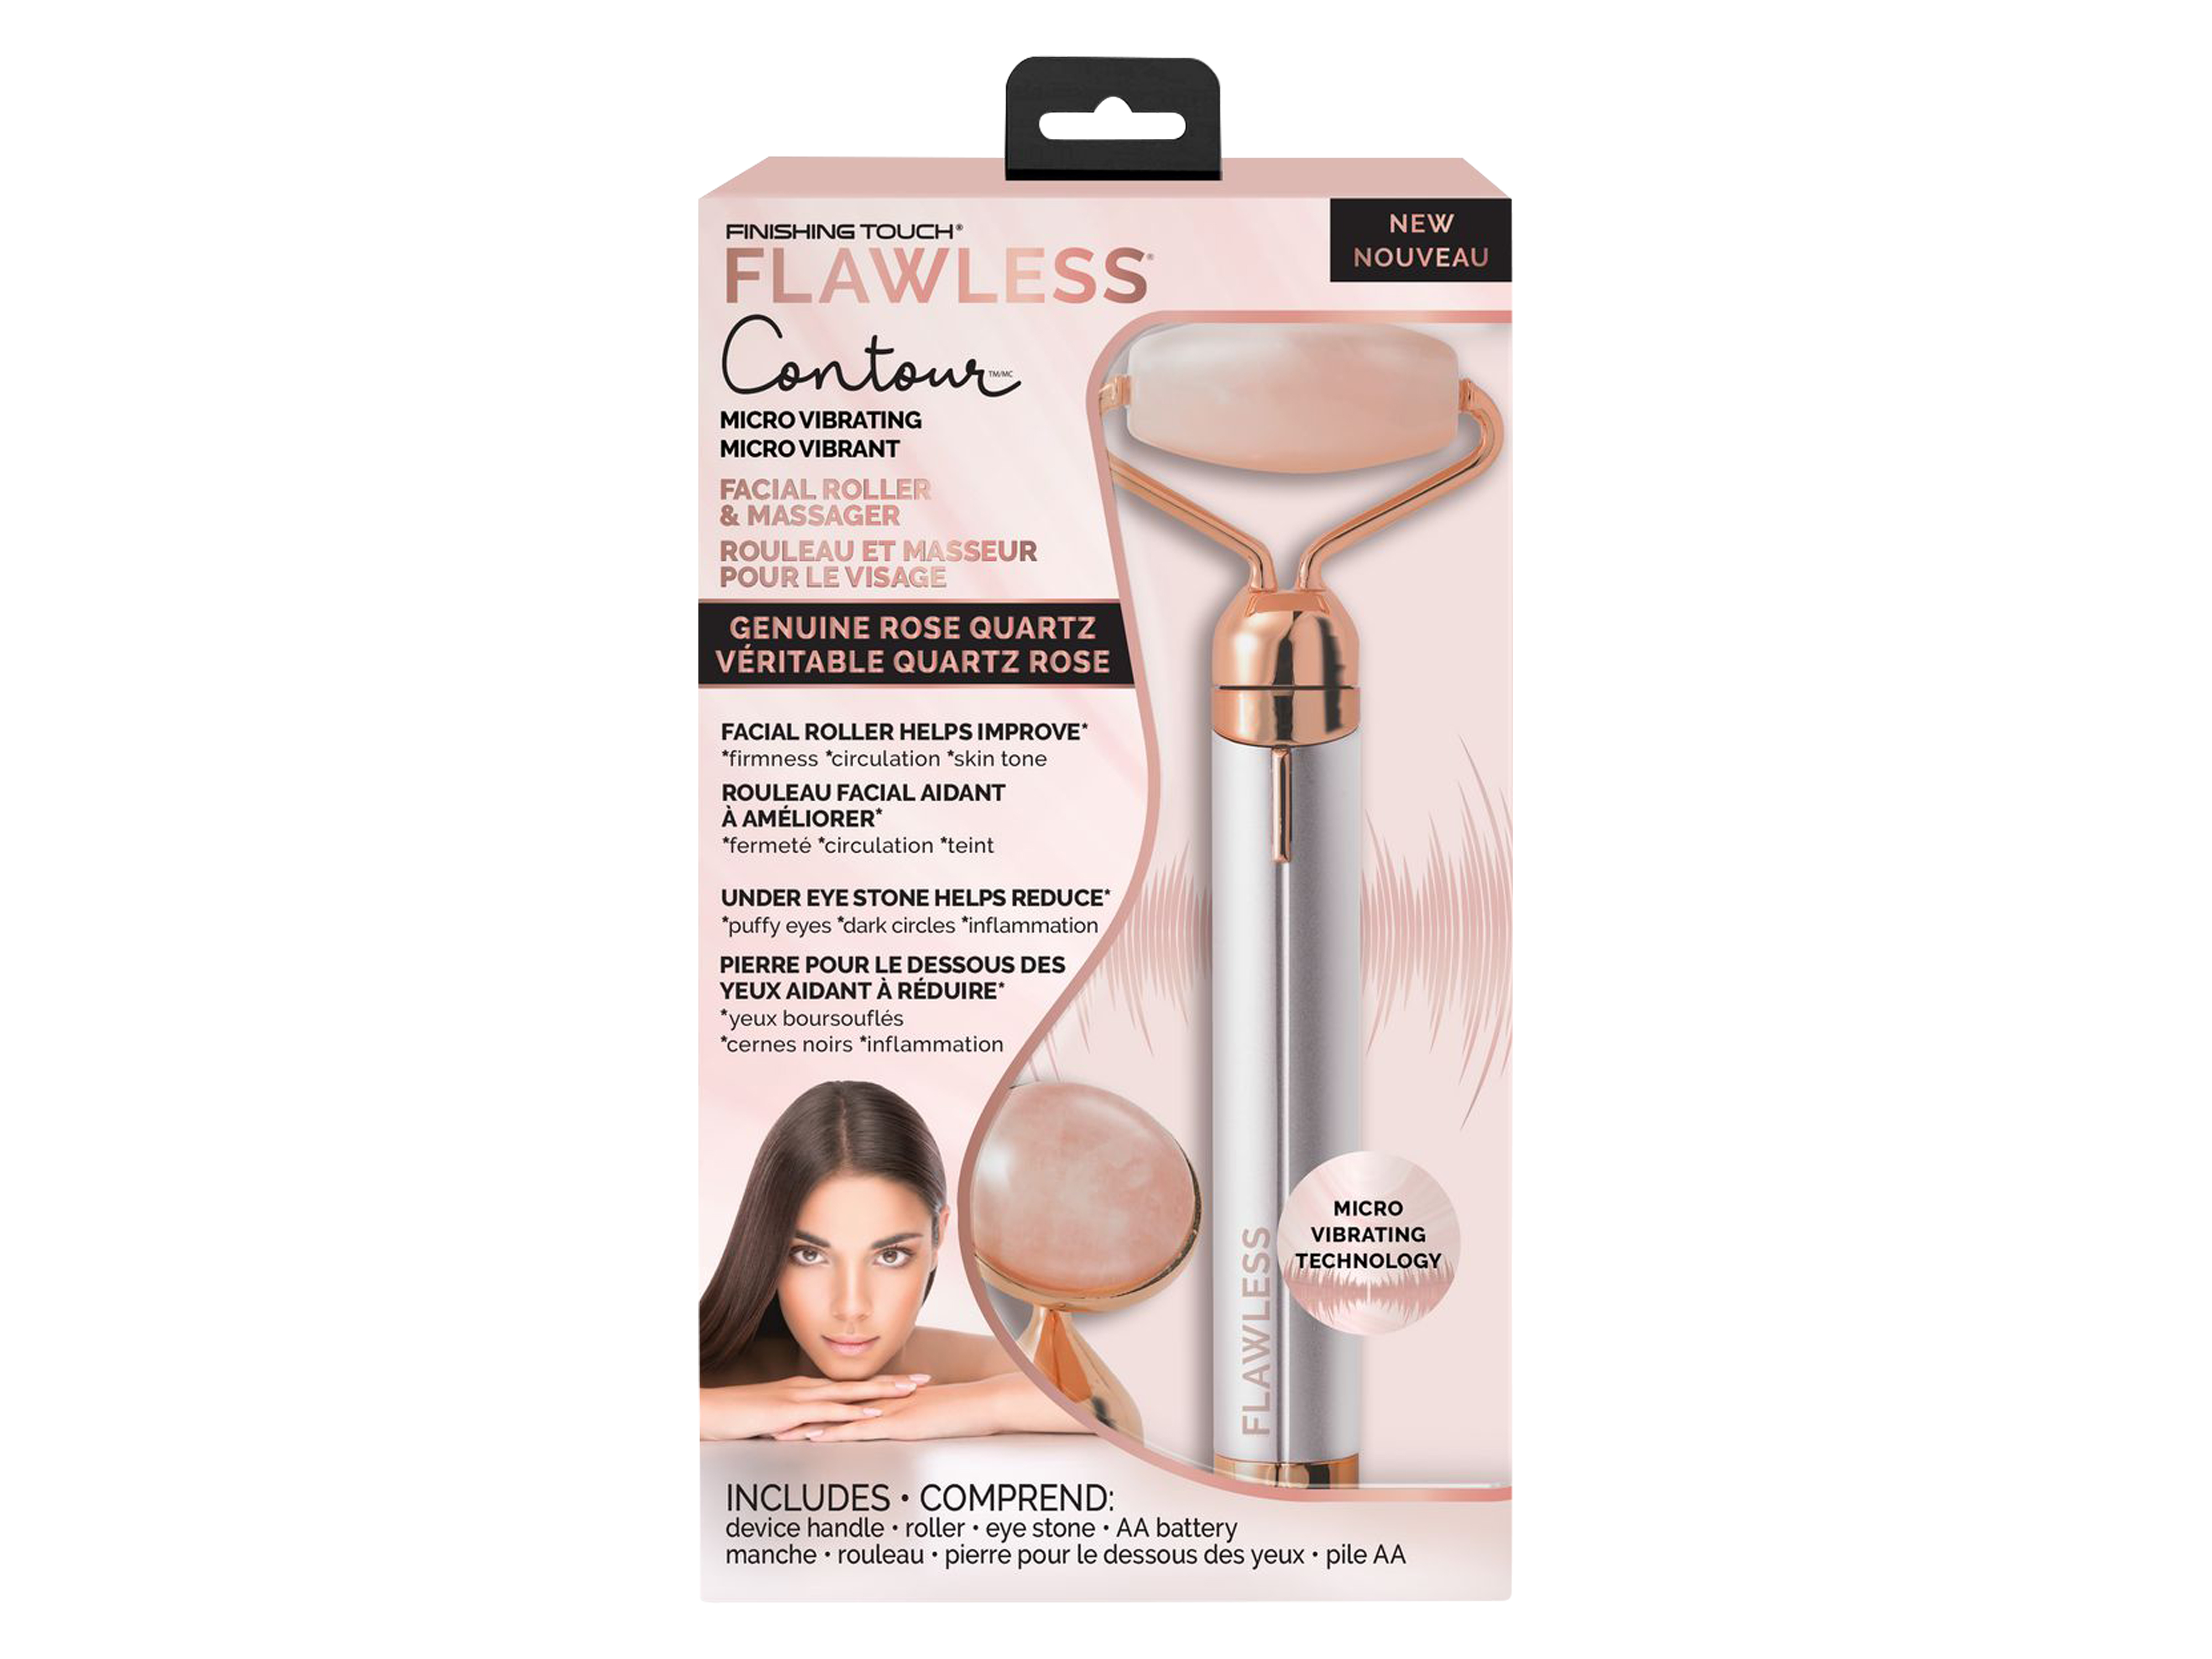 Flawless Finishing Touch Contour, 1 stk